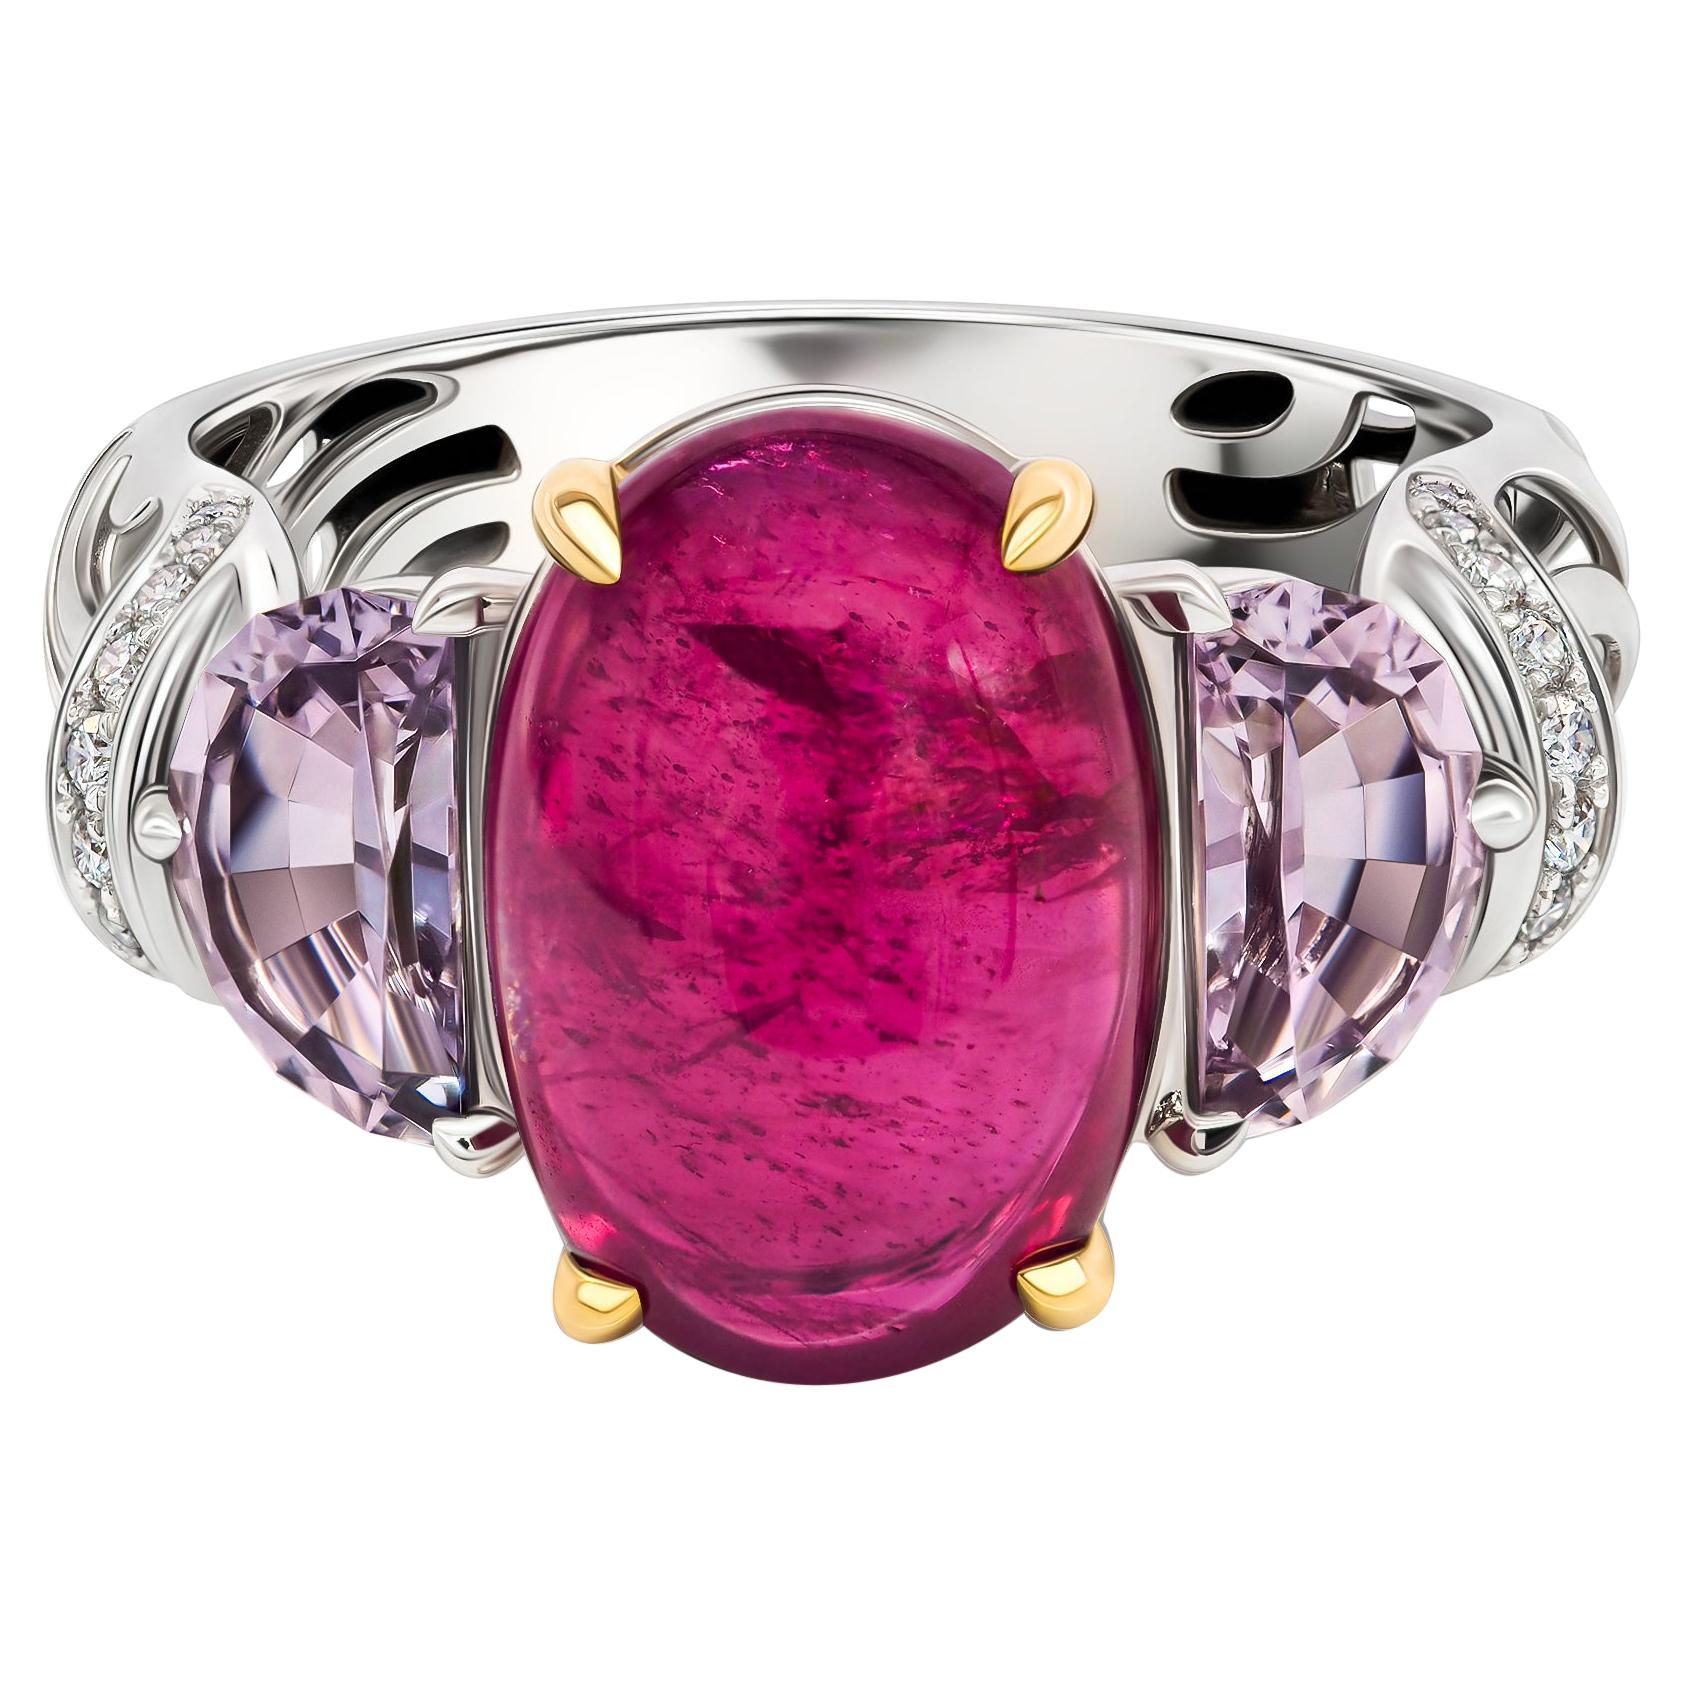 Unheated Ruby Cabochon & Spinels Ring, 18K White Gold & Diamonds Ring